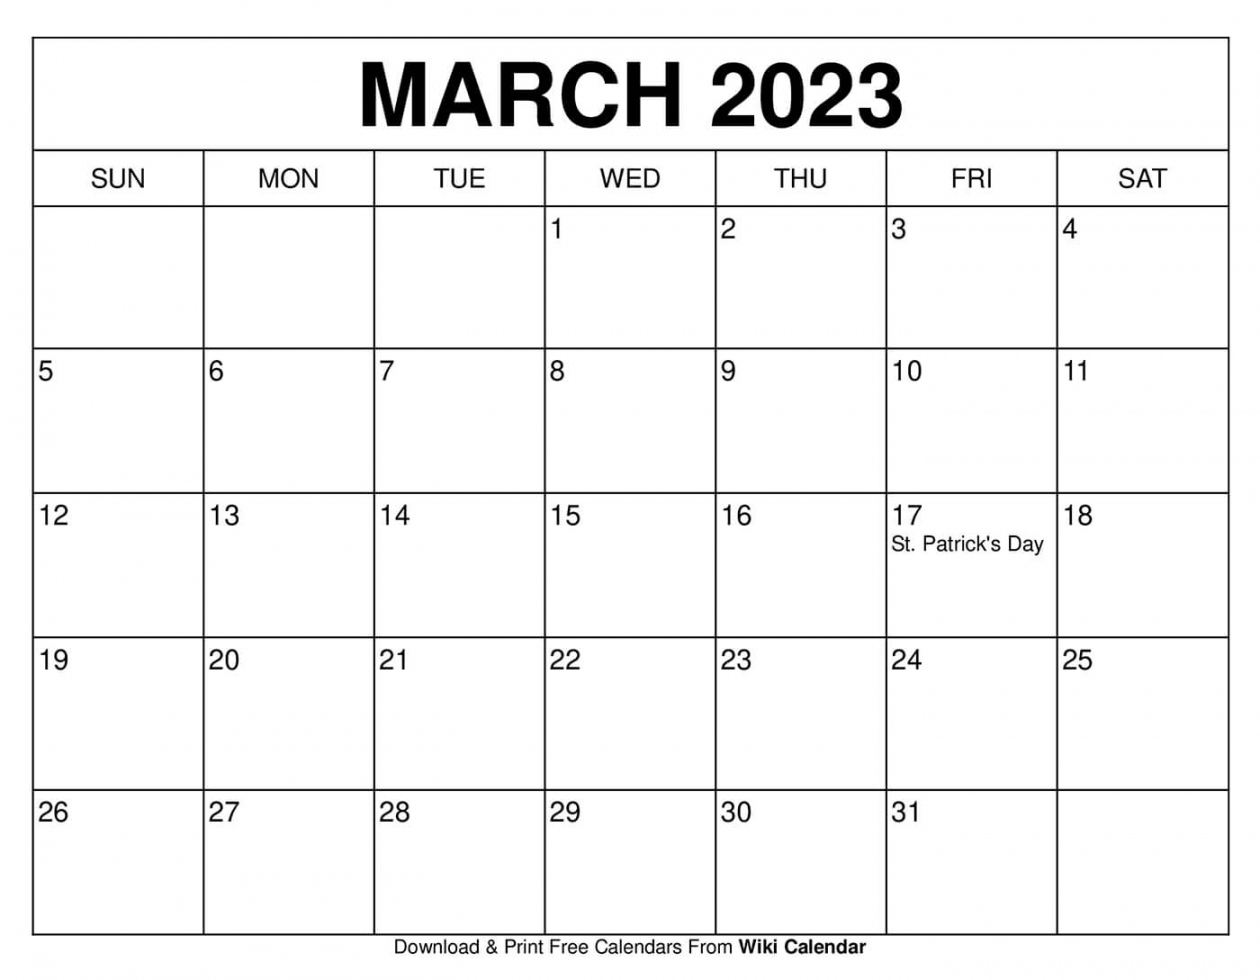 Free Printable March  Calendar Templates With Holidays - FREE Printables - Free Printable March Calendar